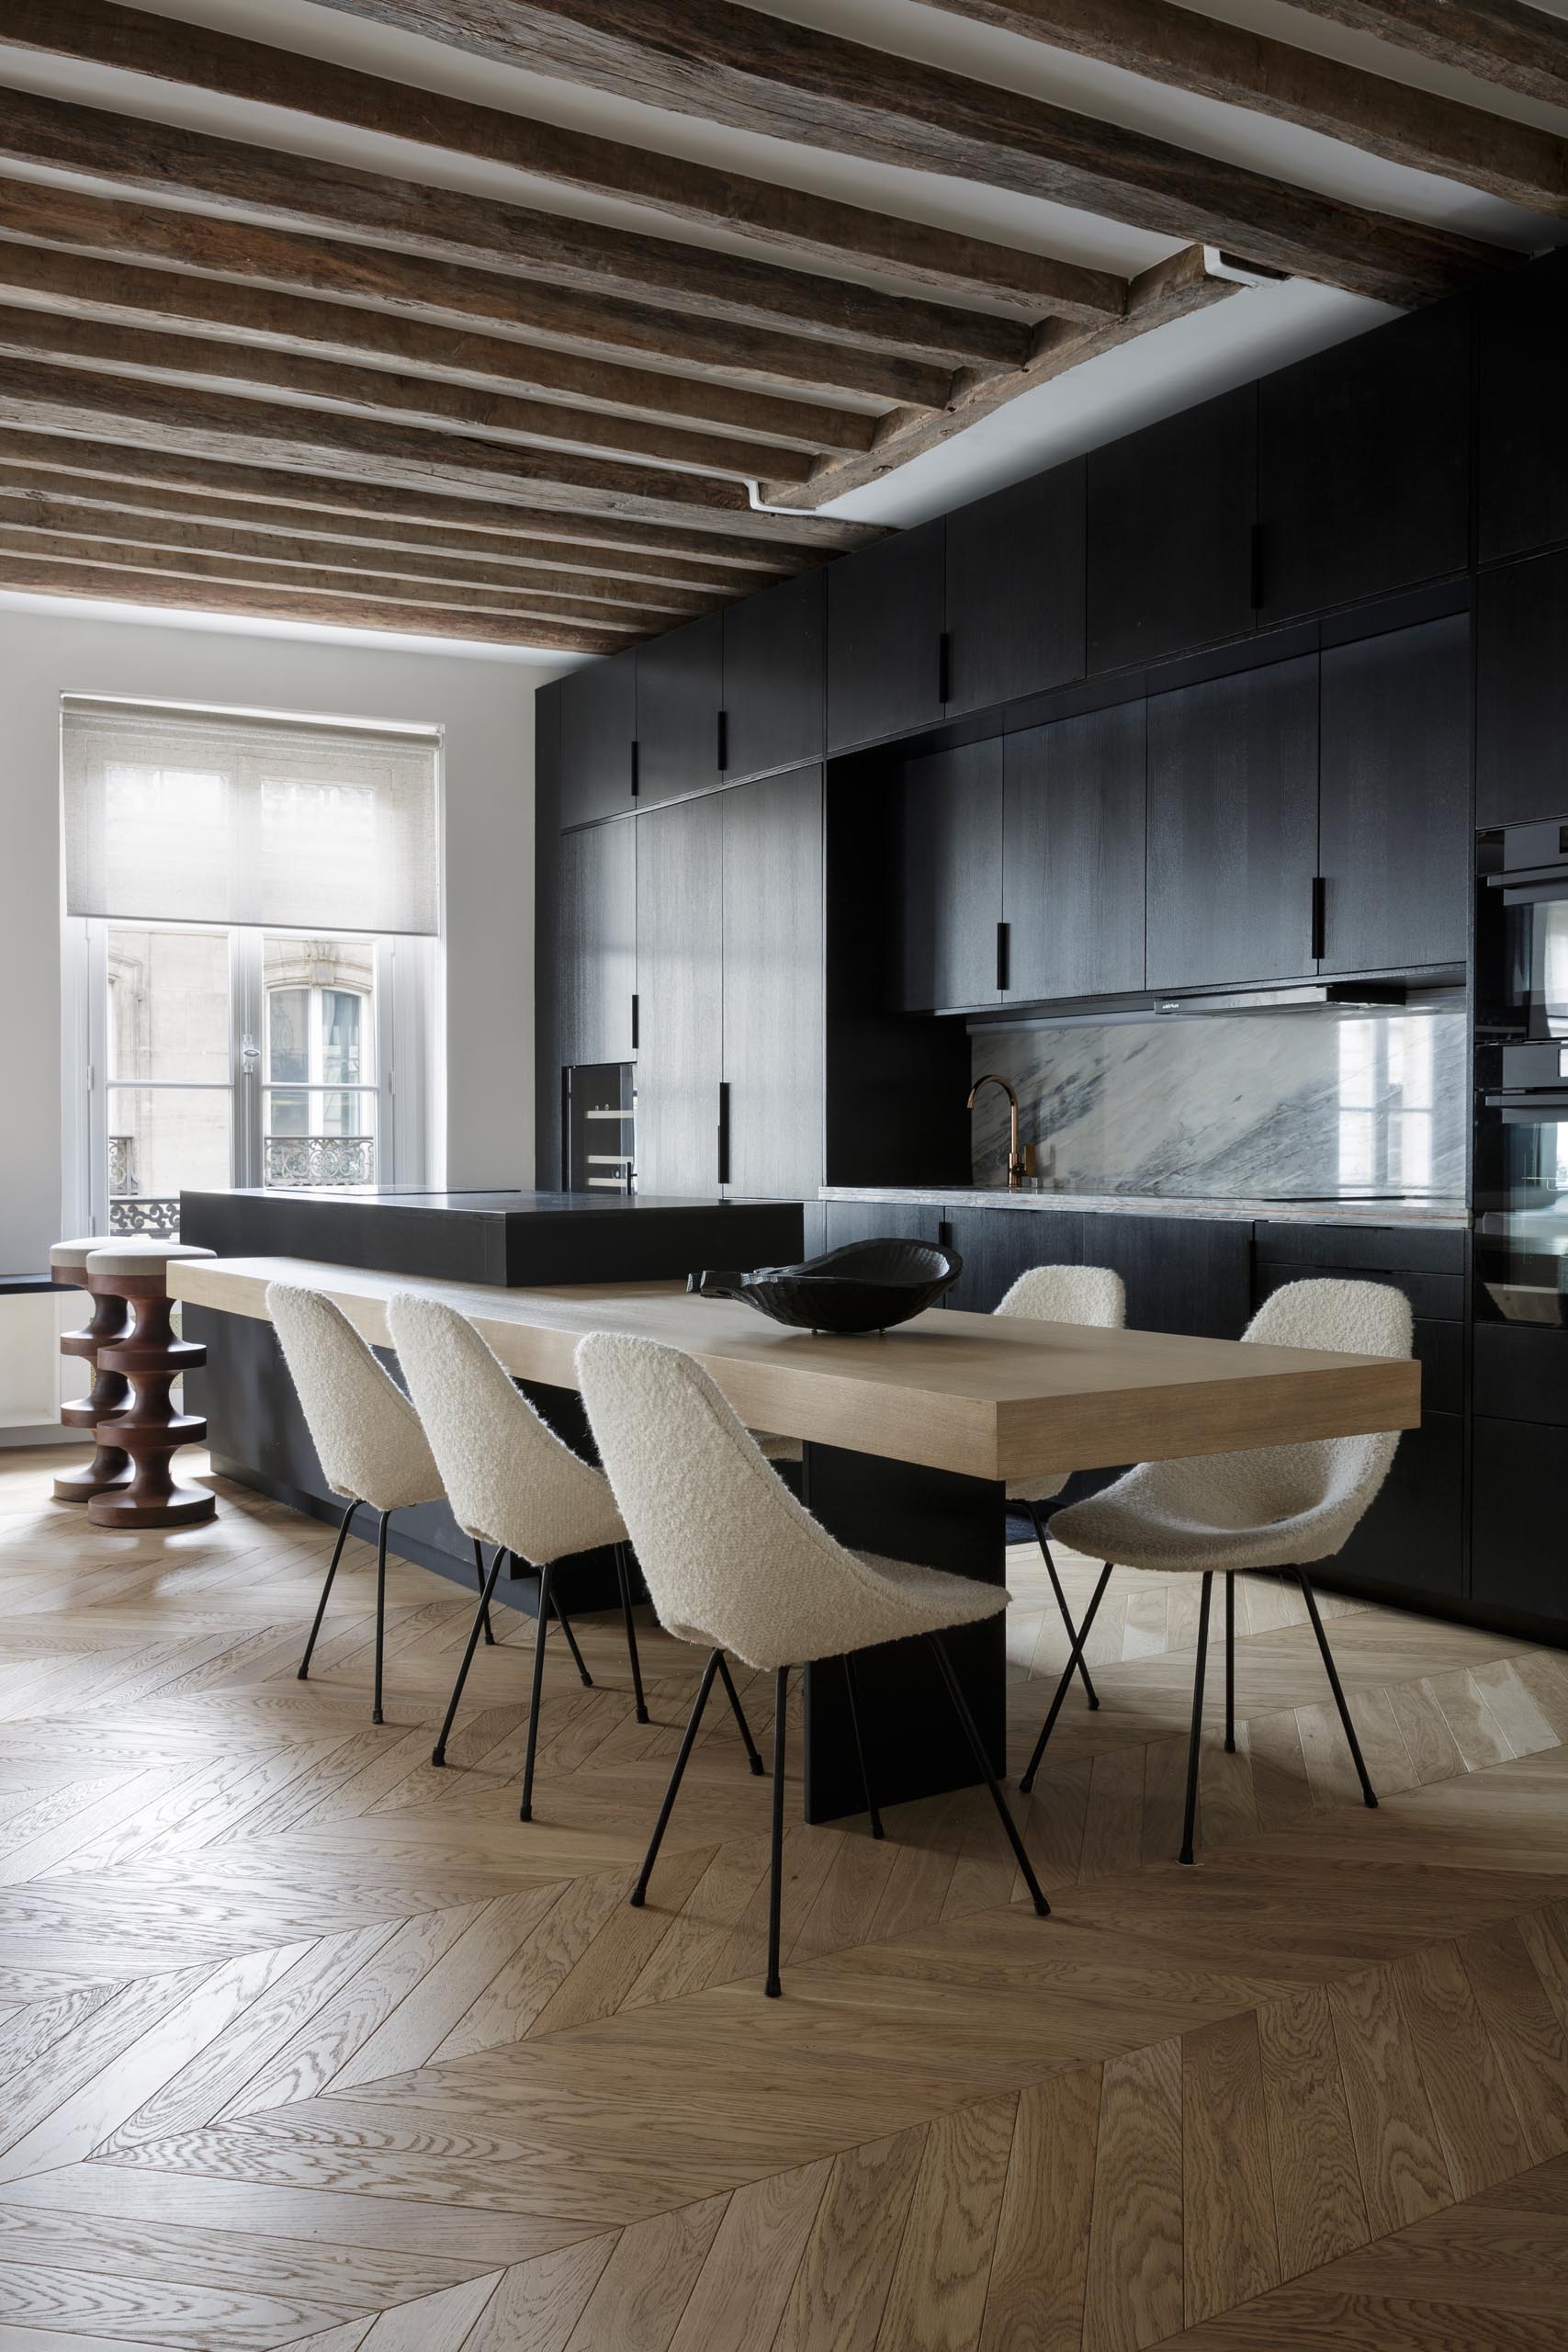 A modern matte black kitchen with a black appliances, exposed wood beams, and an island with a built-in dining table.